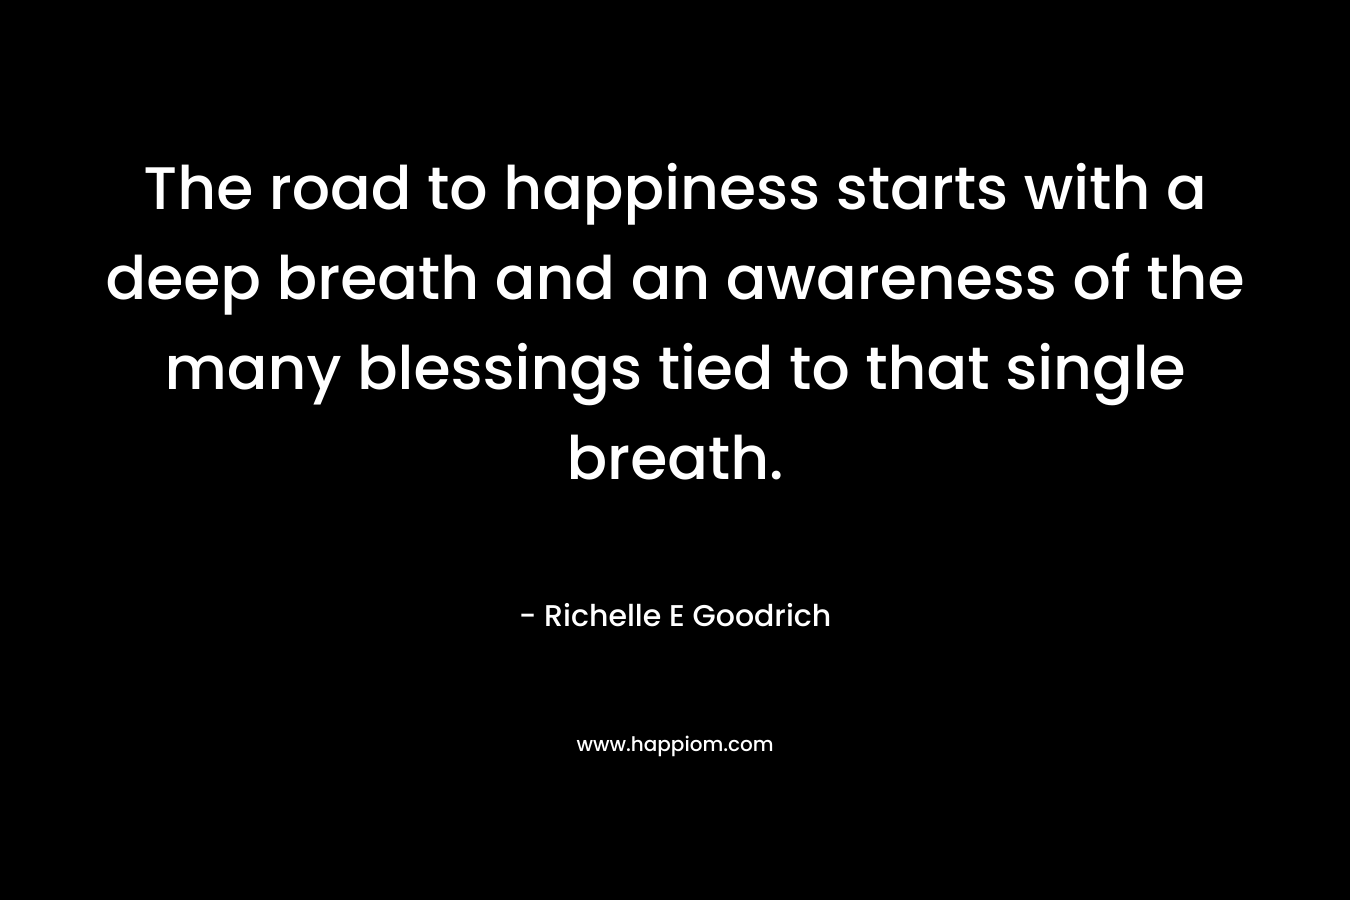 The road to happiness starts with a deep breath and an awareness of the many blessings tied to that single breath.